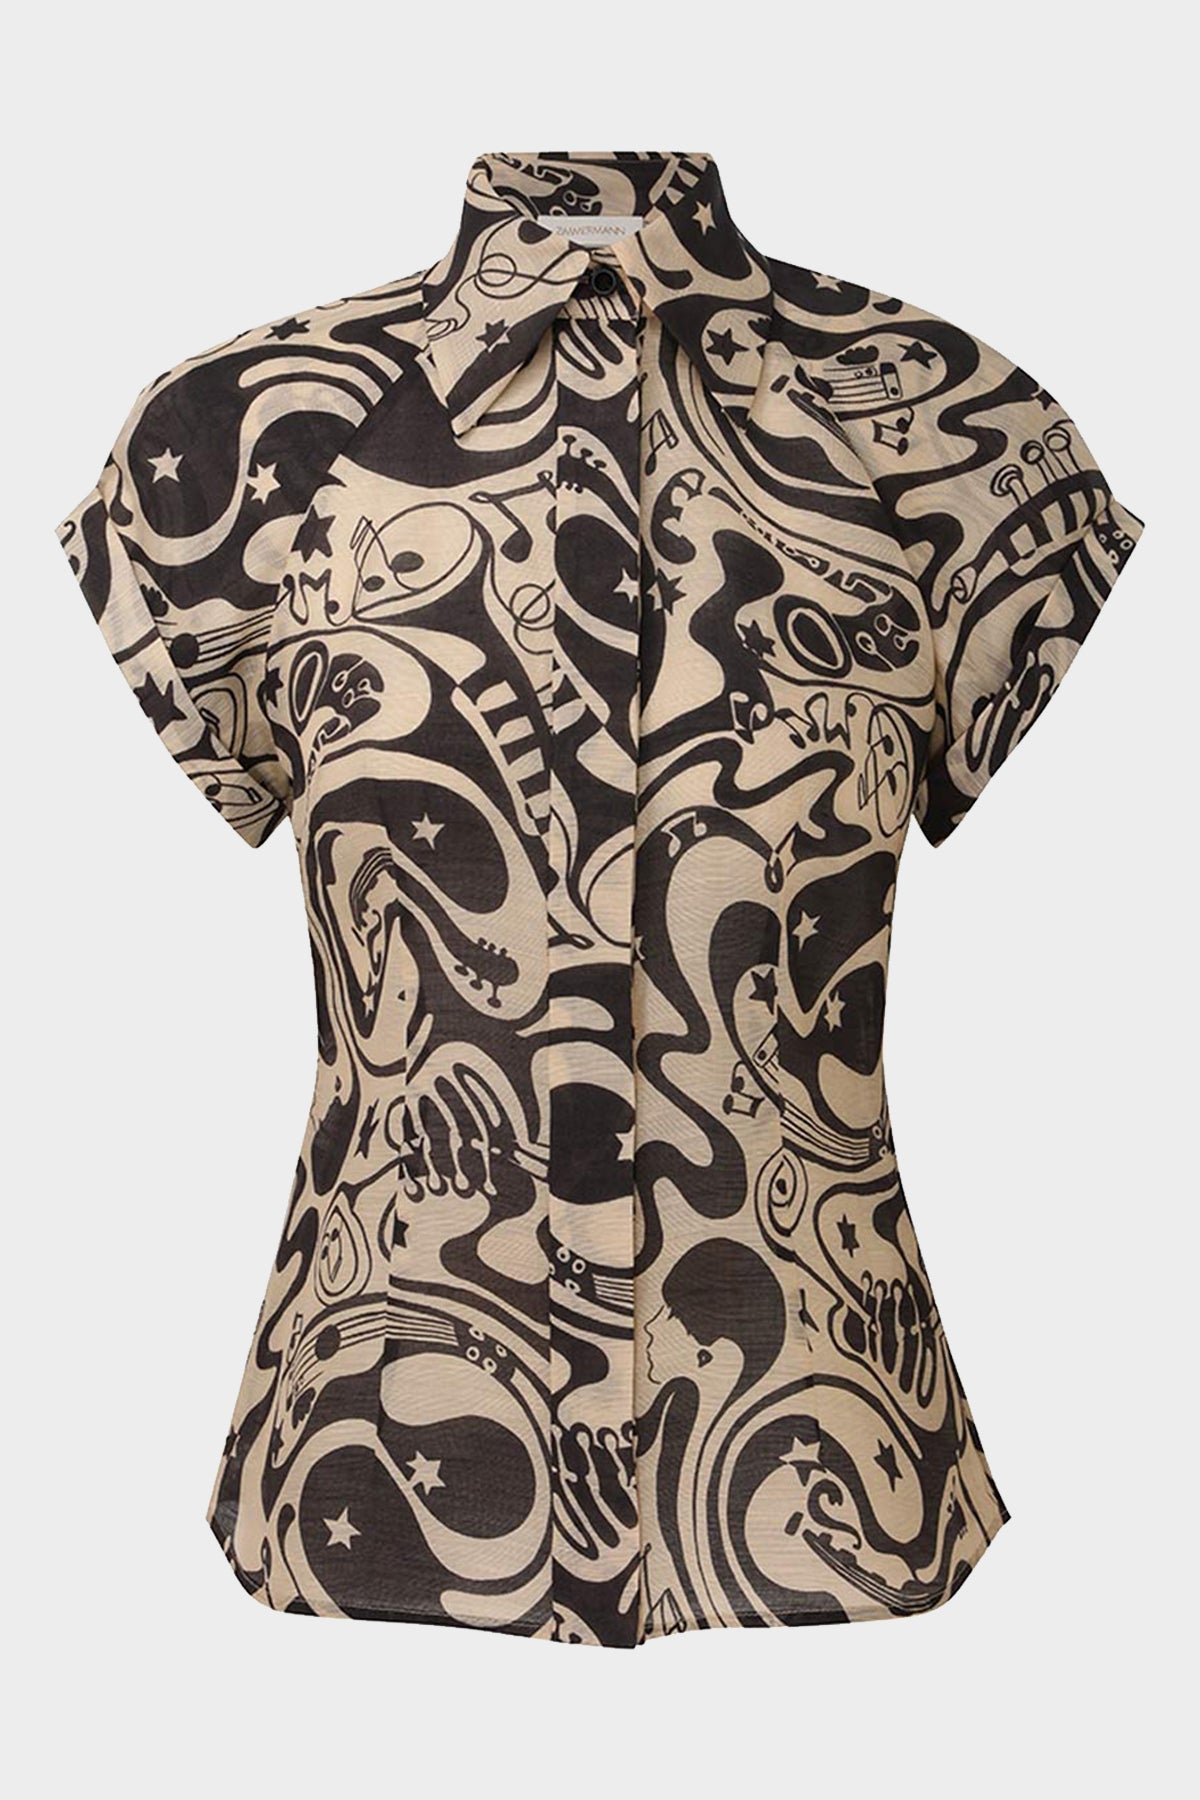 Matchmaker Fitted Blouse in Black Tea Abstract Musical - shop-olivia.com